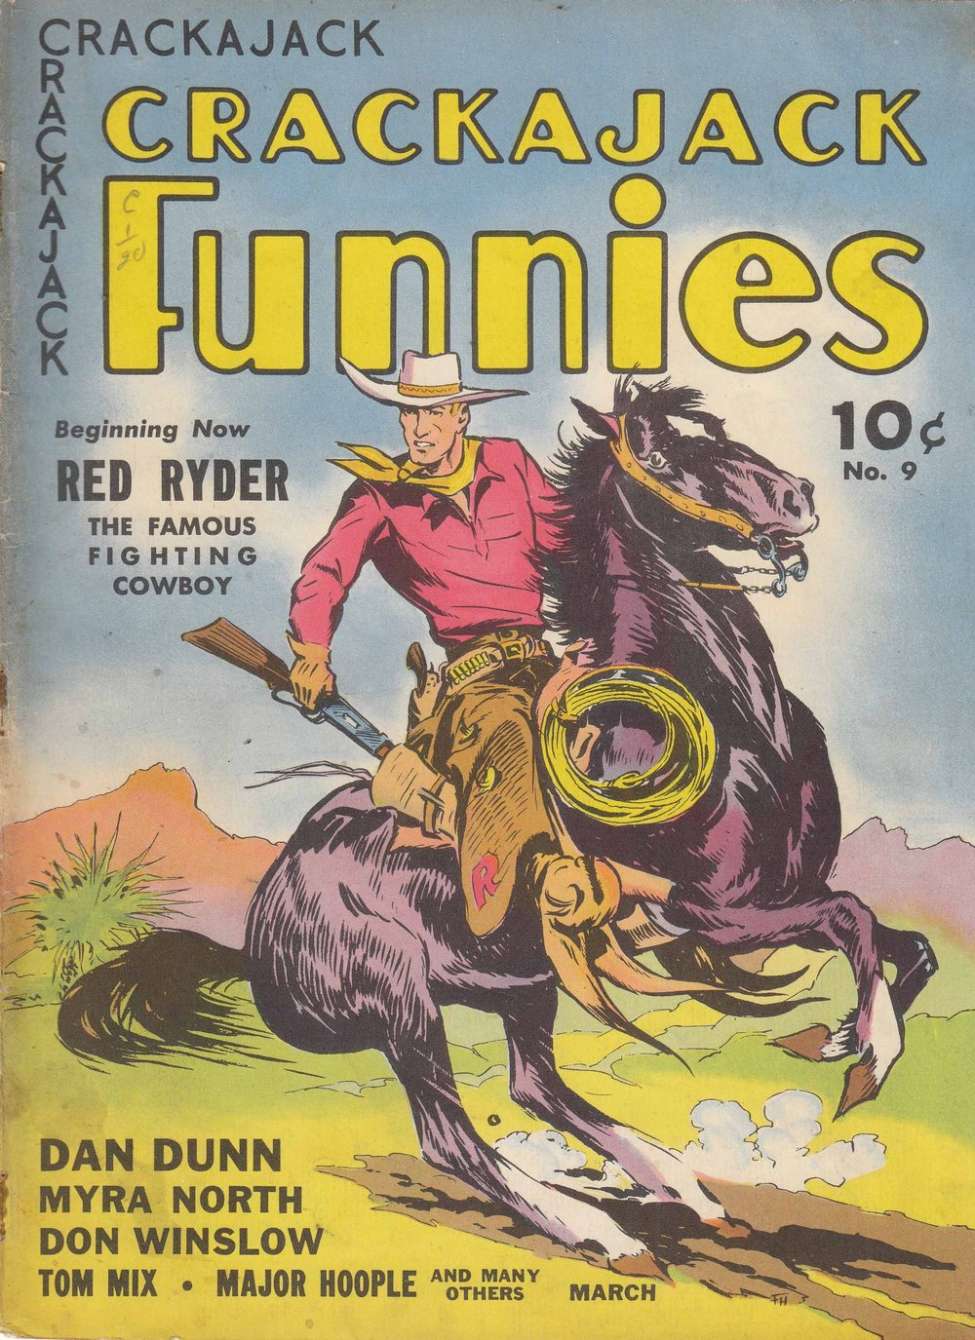 Book Cover For Red Ryder Stories From Crackajack Funnies